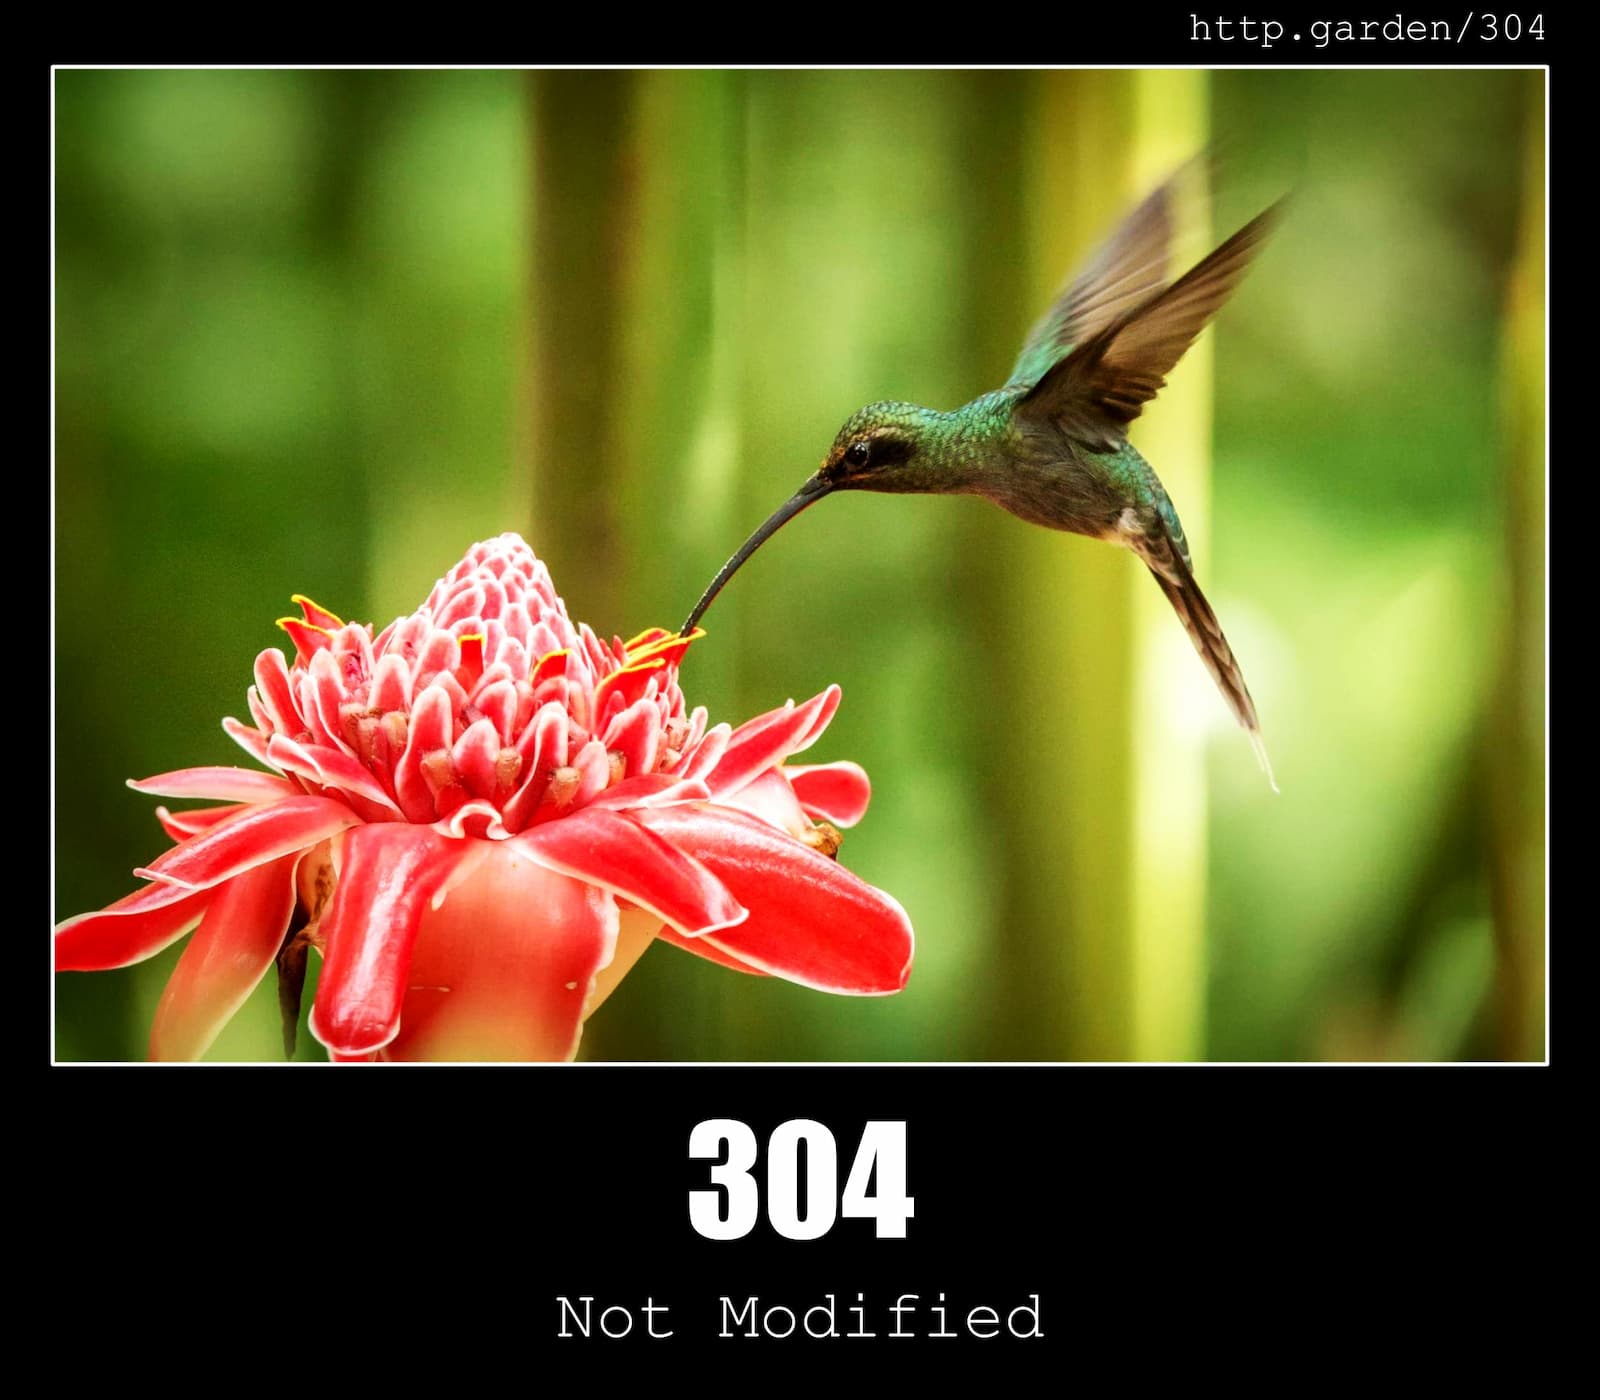 HTTP Status Code 304 Not Modified